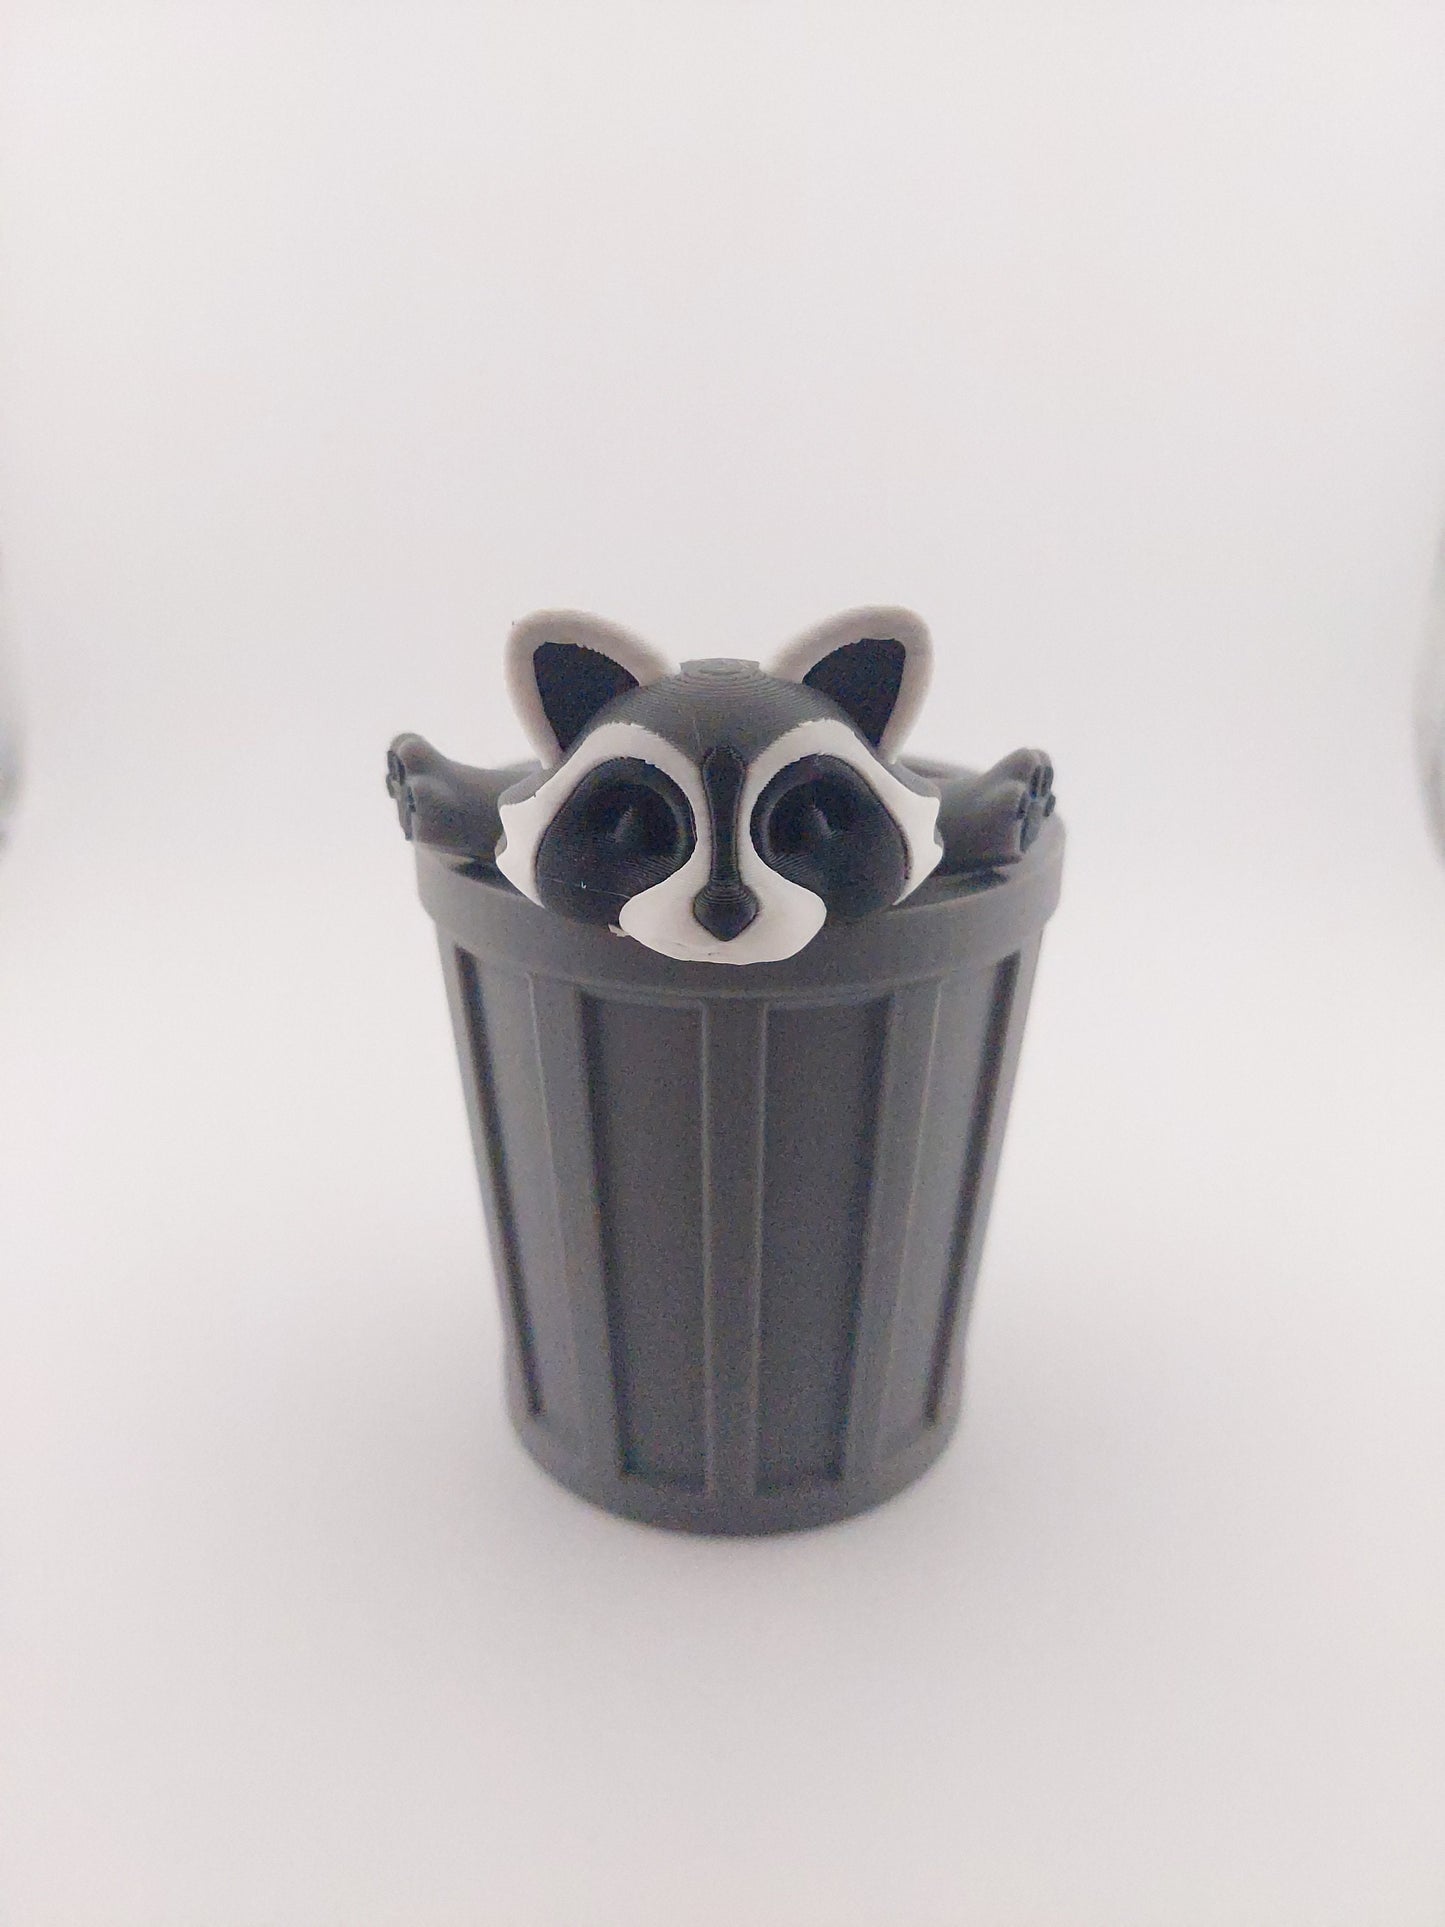 1 Articulated Racoon Trash Panda - 3D Printed Fidget Fantasy Creature - Authorized Seller